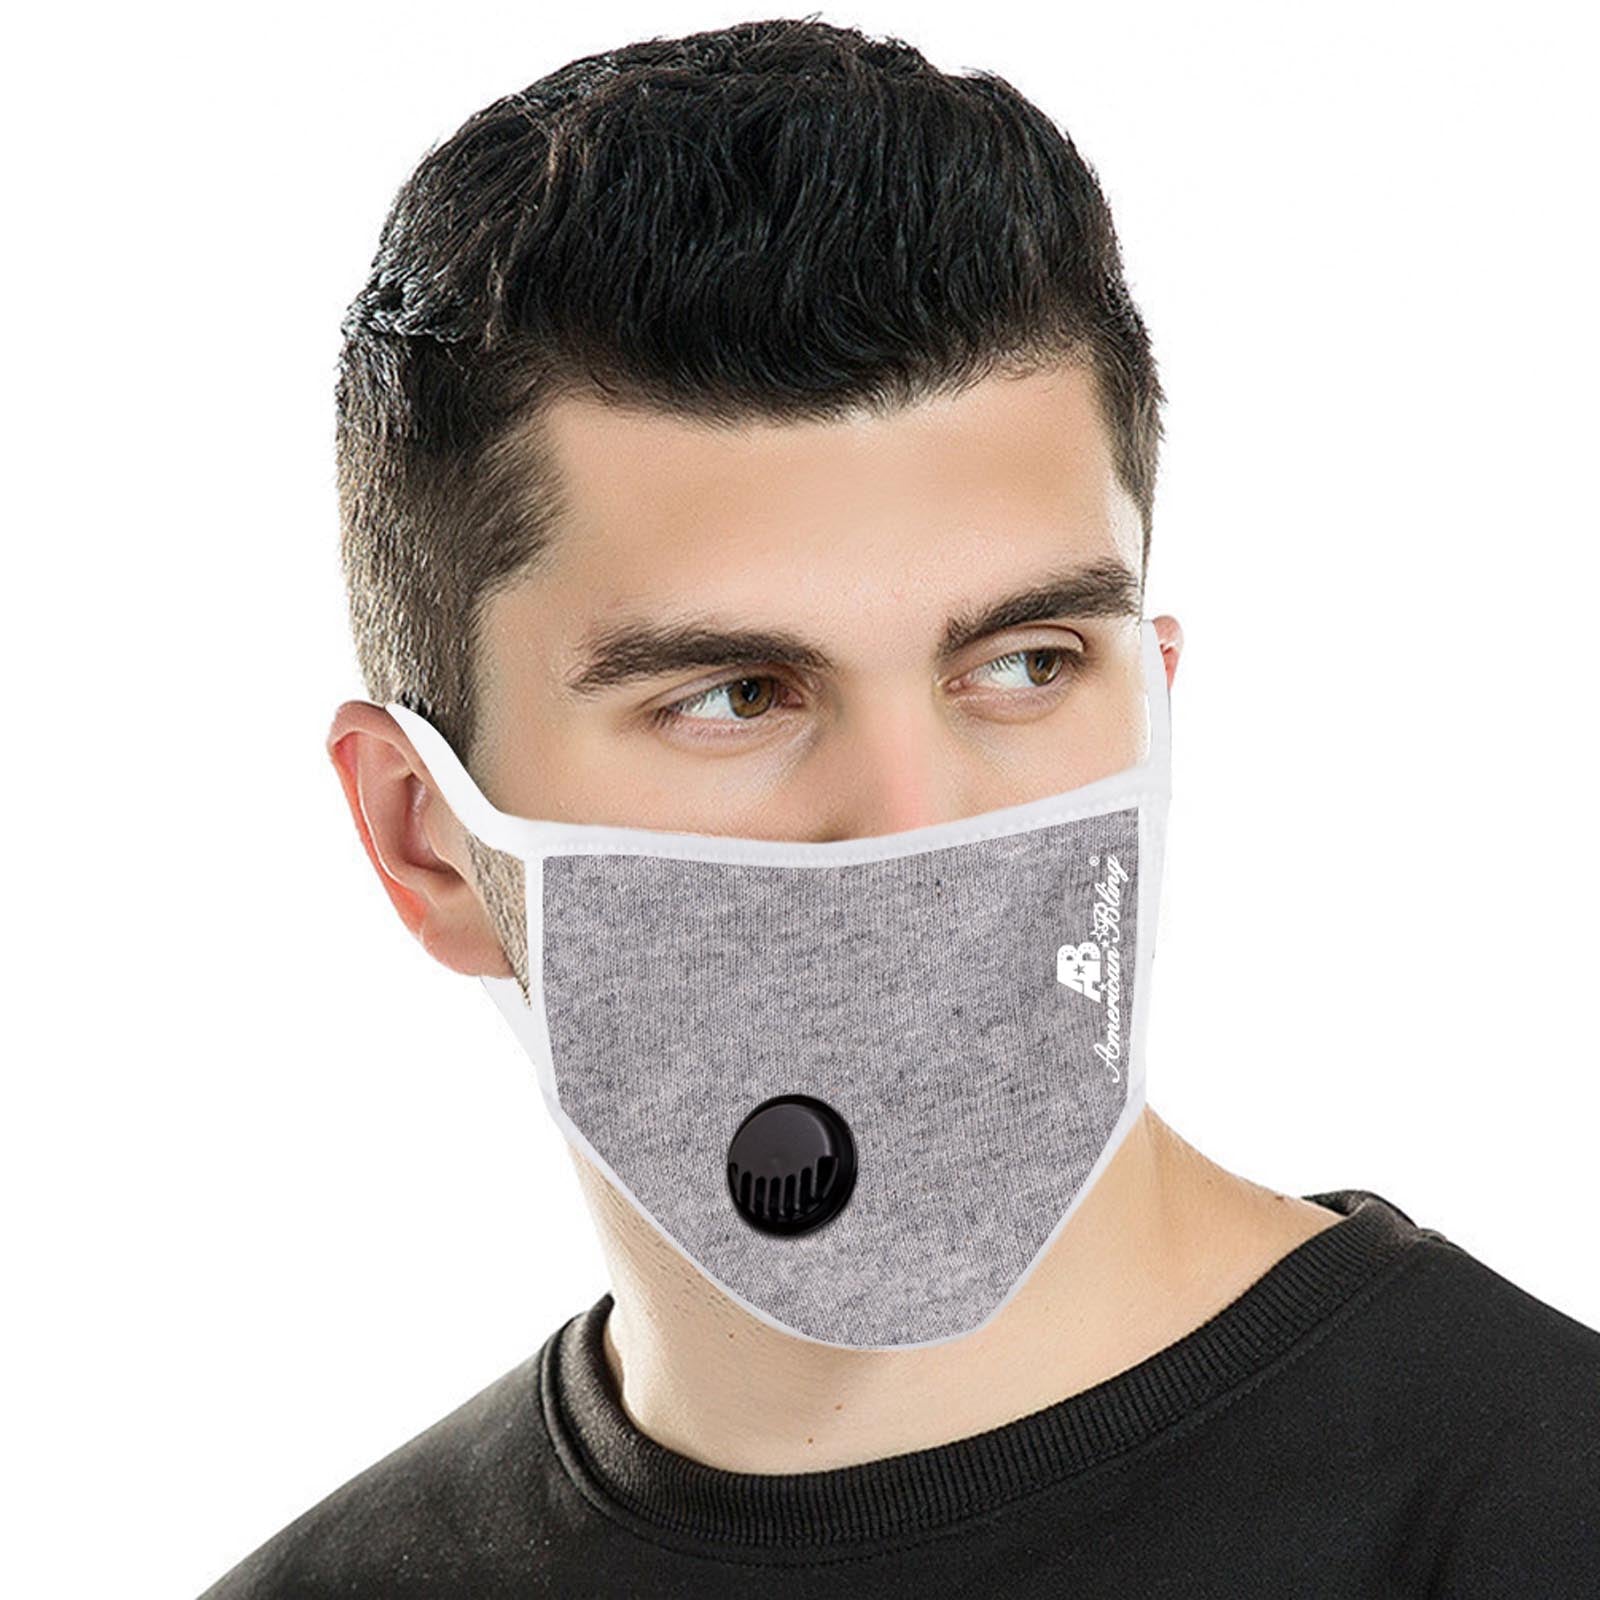 FCM-039R American Bling Single Breathing Valve Fabric Face Mask Double Layer with Adjustable Nose Clip 1PC Pack